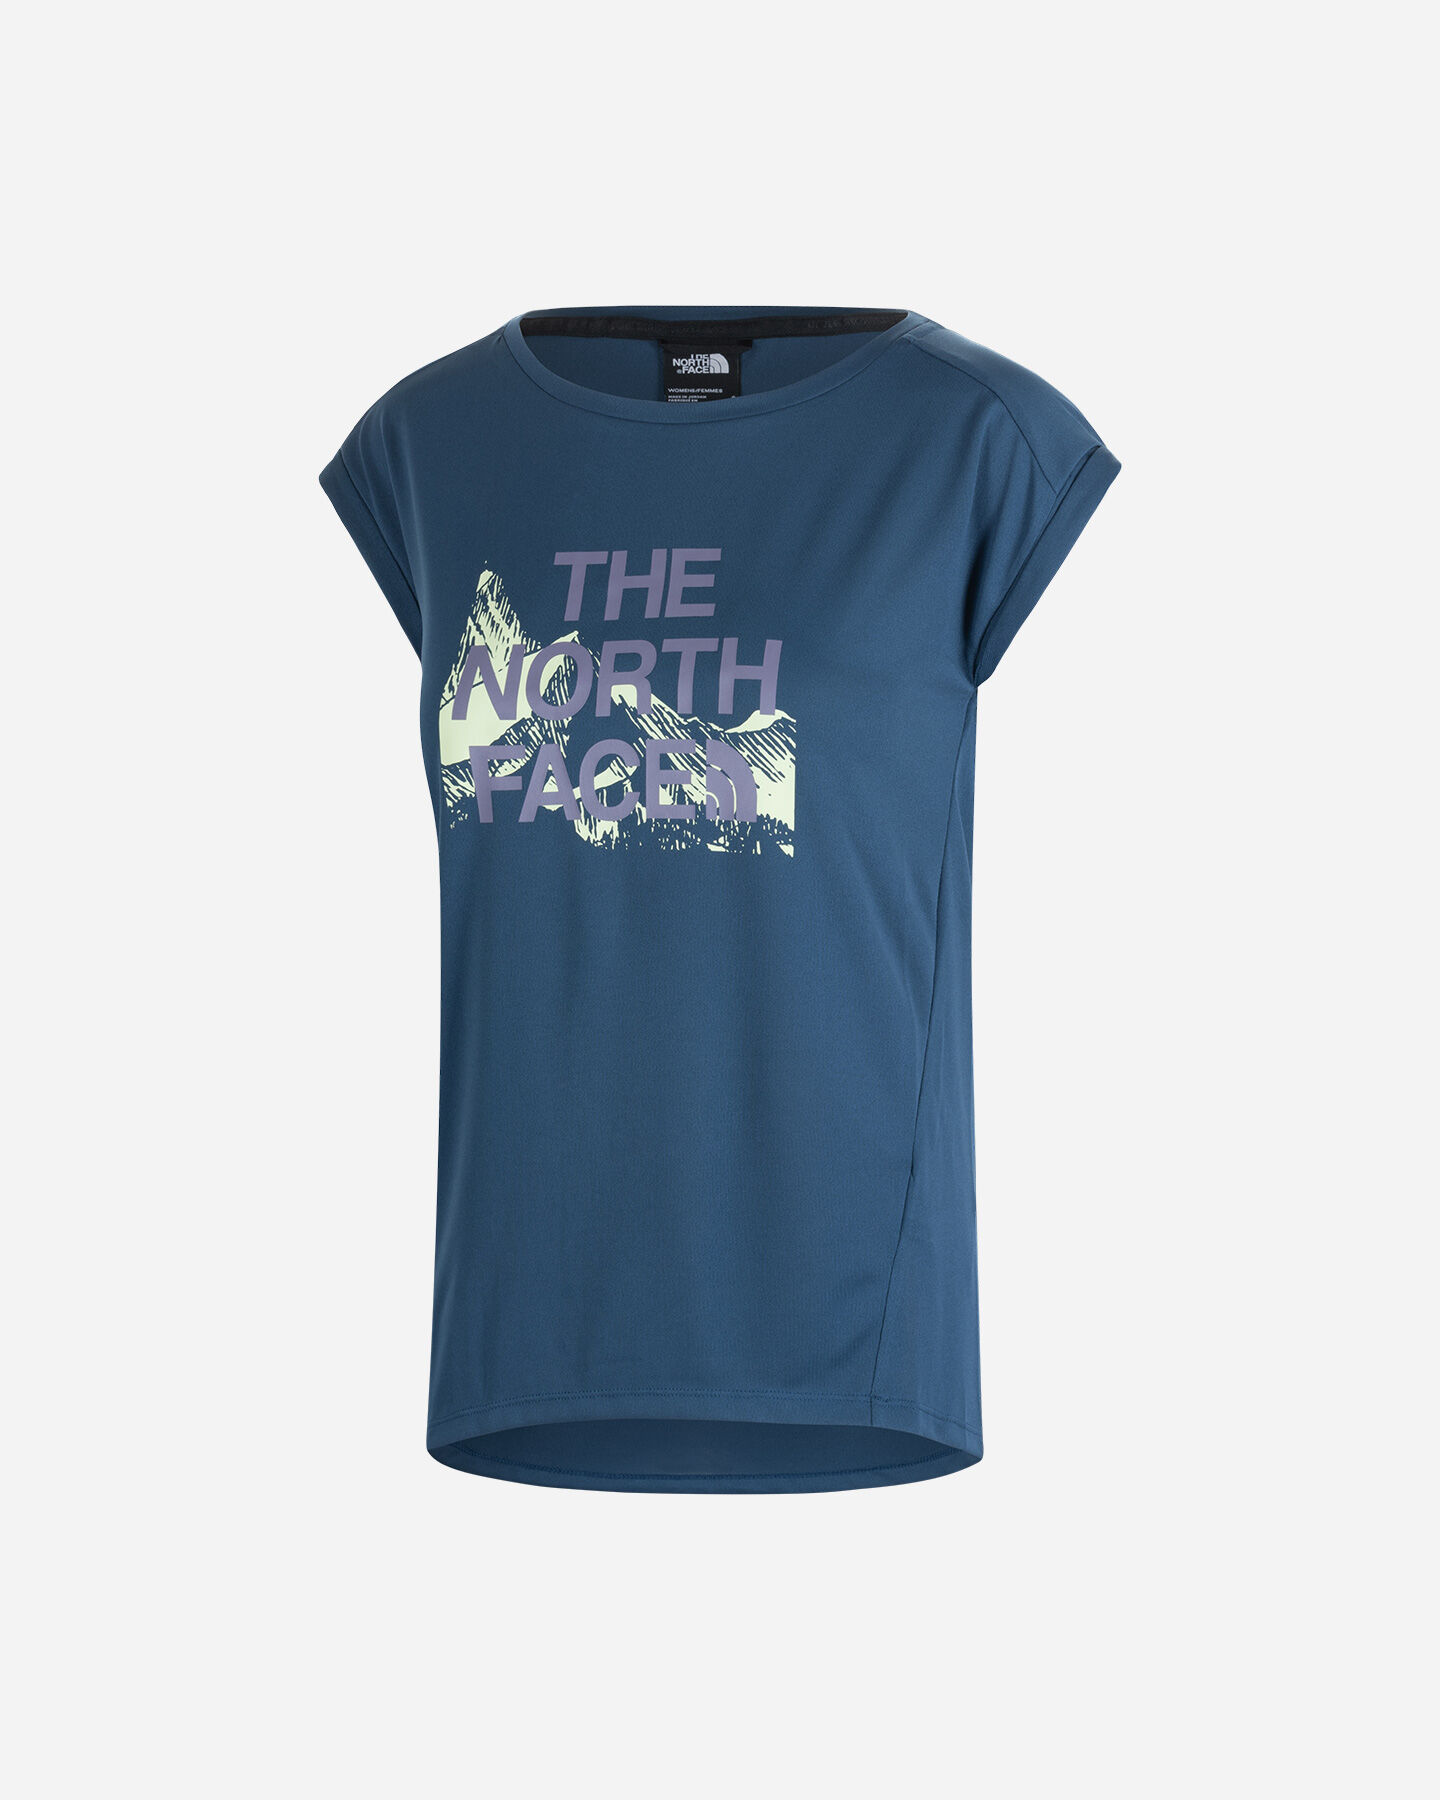  T-Shirt THE NORTH FACE NEW LOGO W S5537245|HDC|XS scatto 0